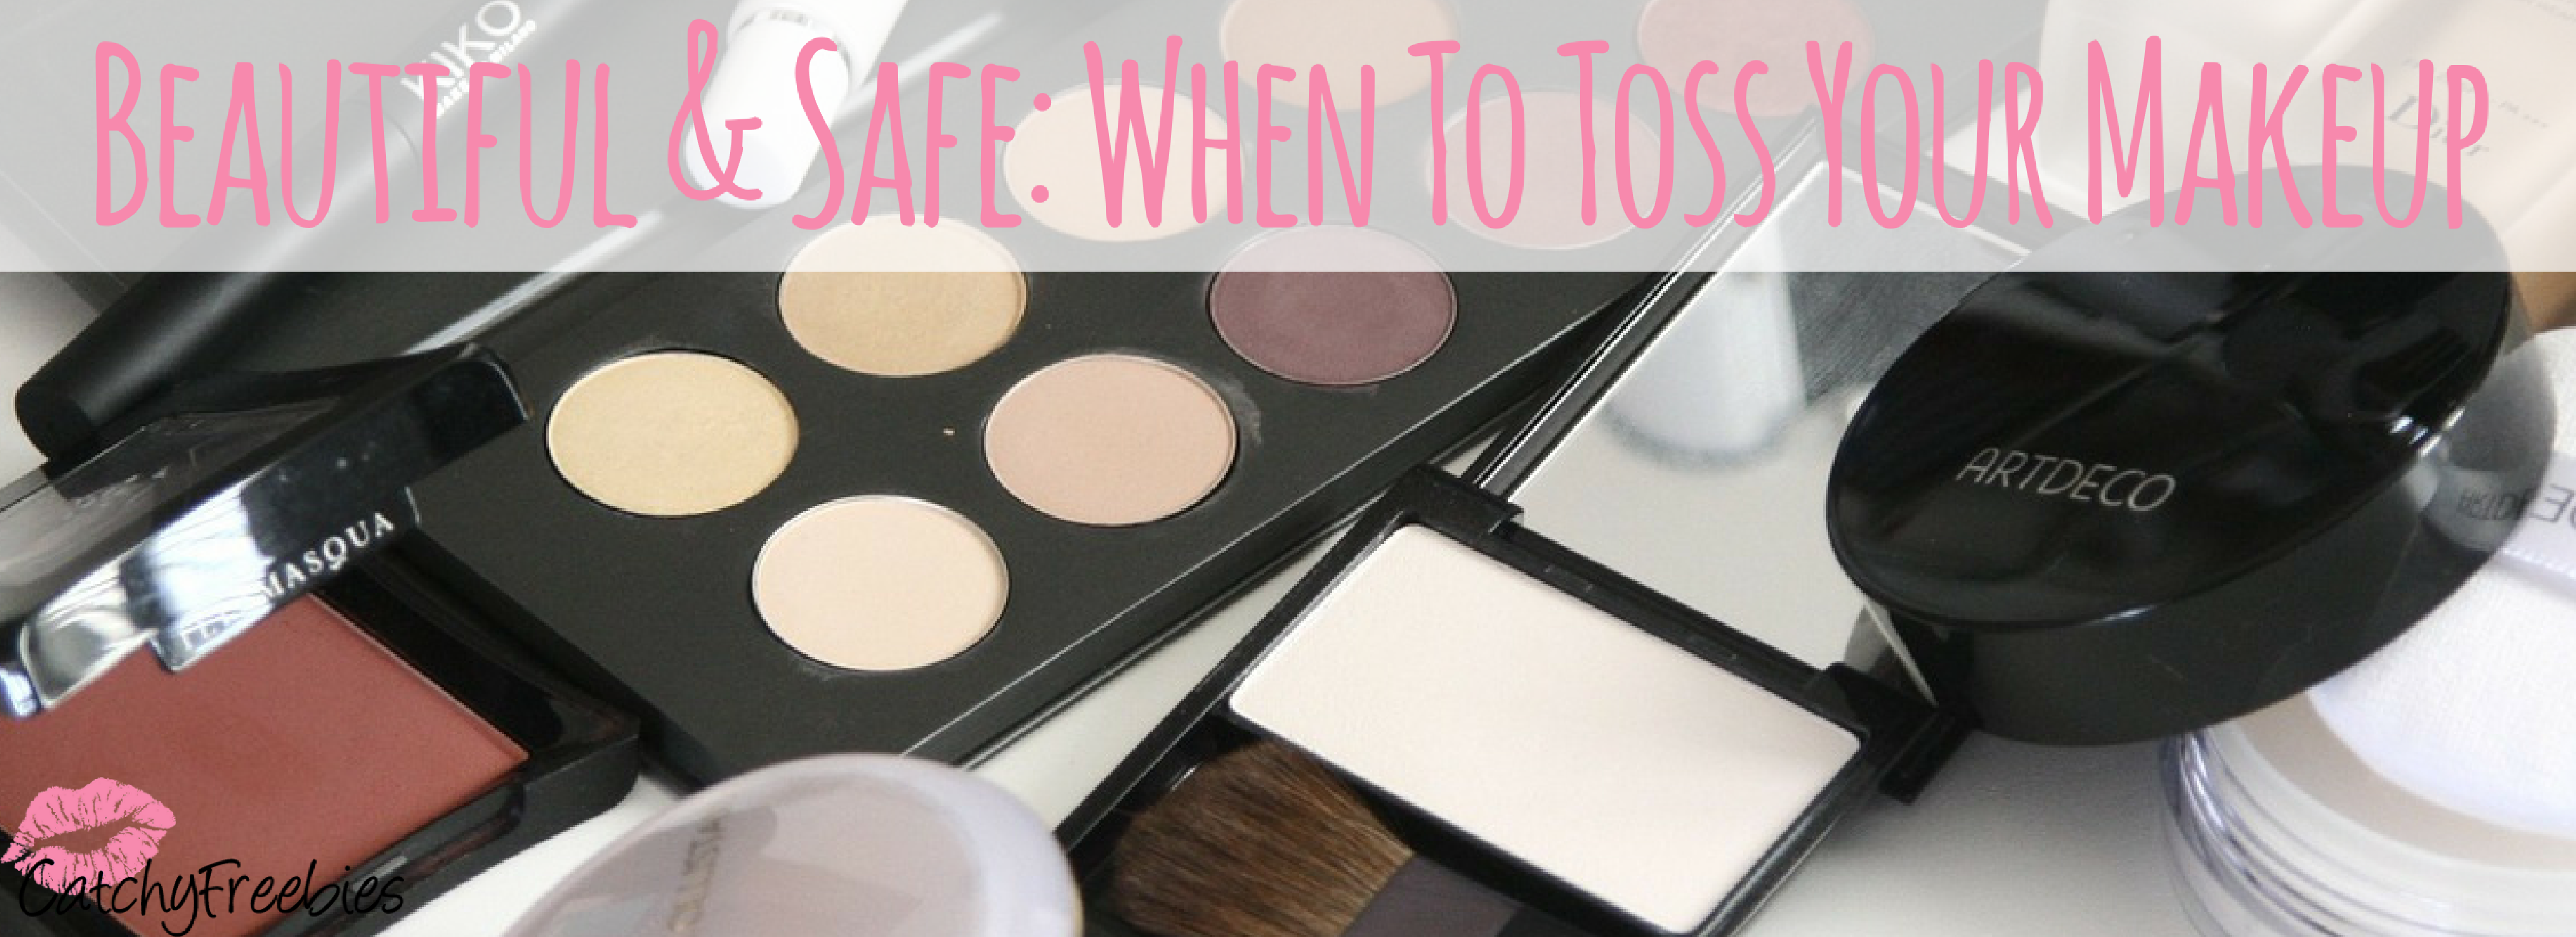 Beautiful & Safe: When To Toss Your Makeup